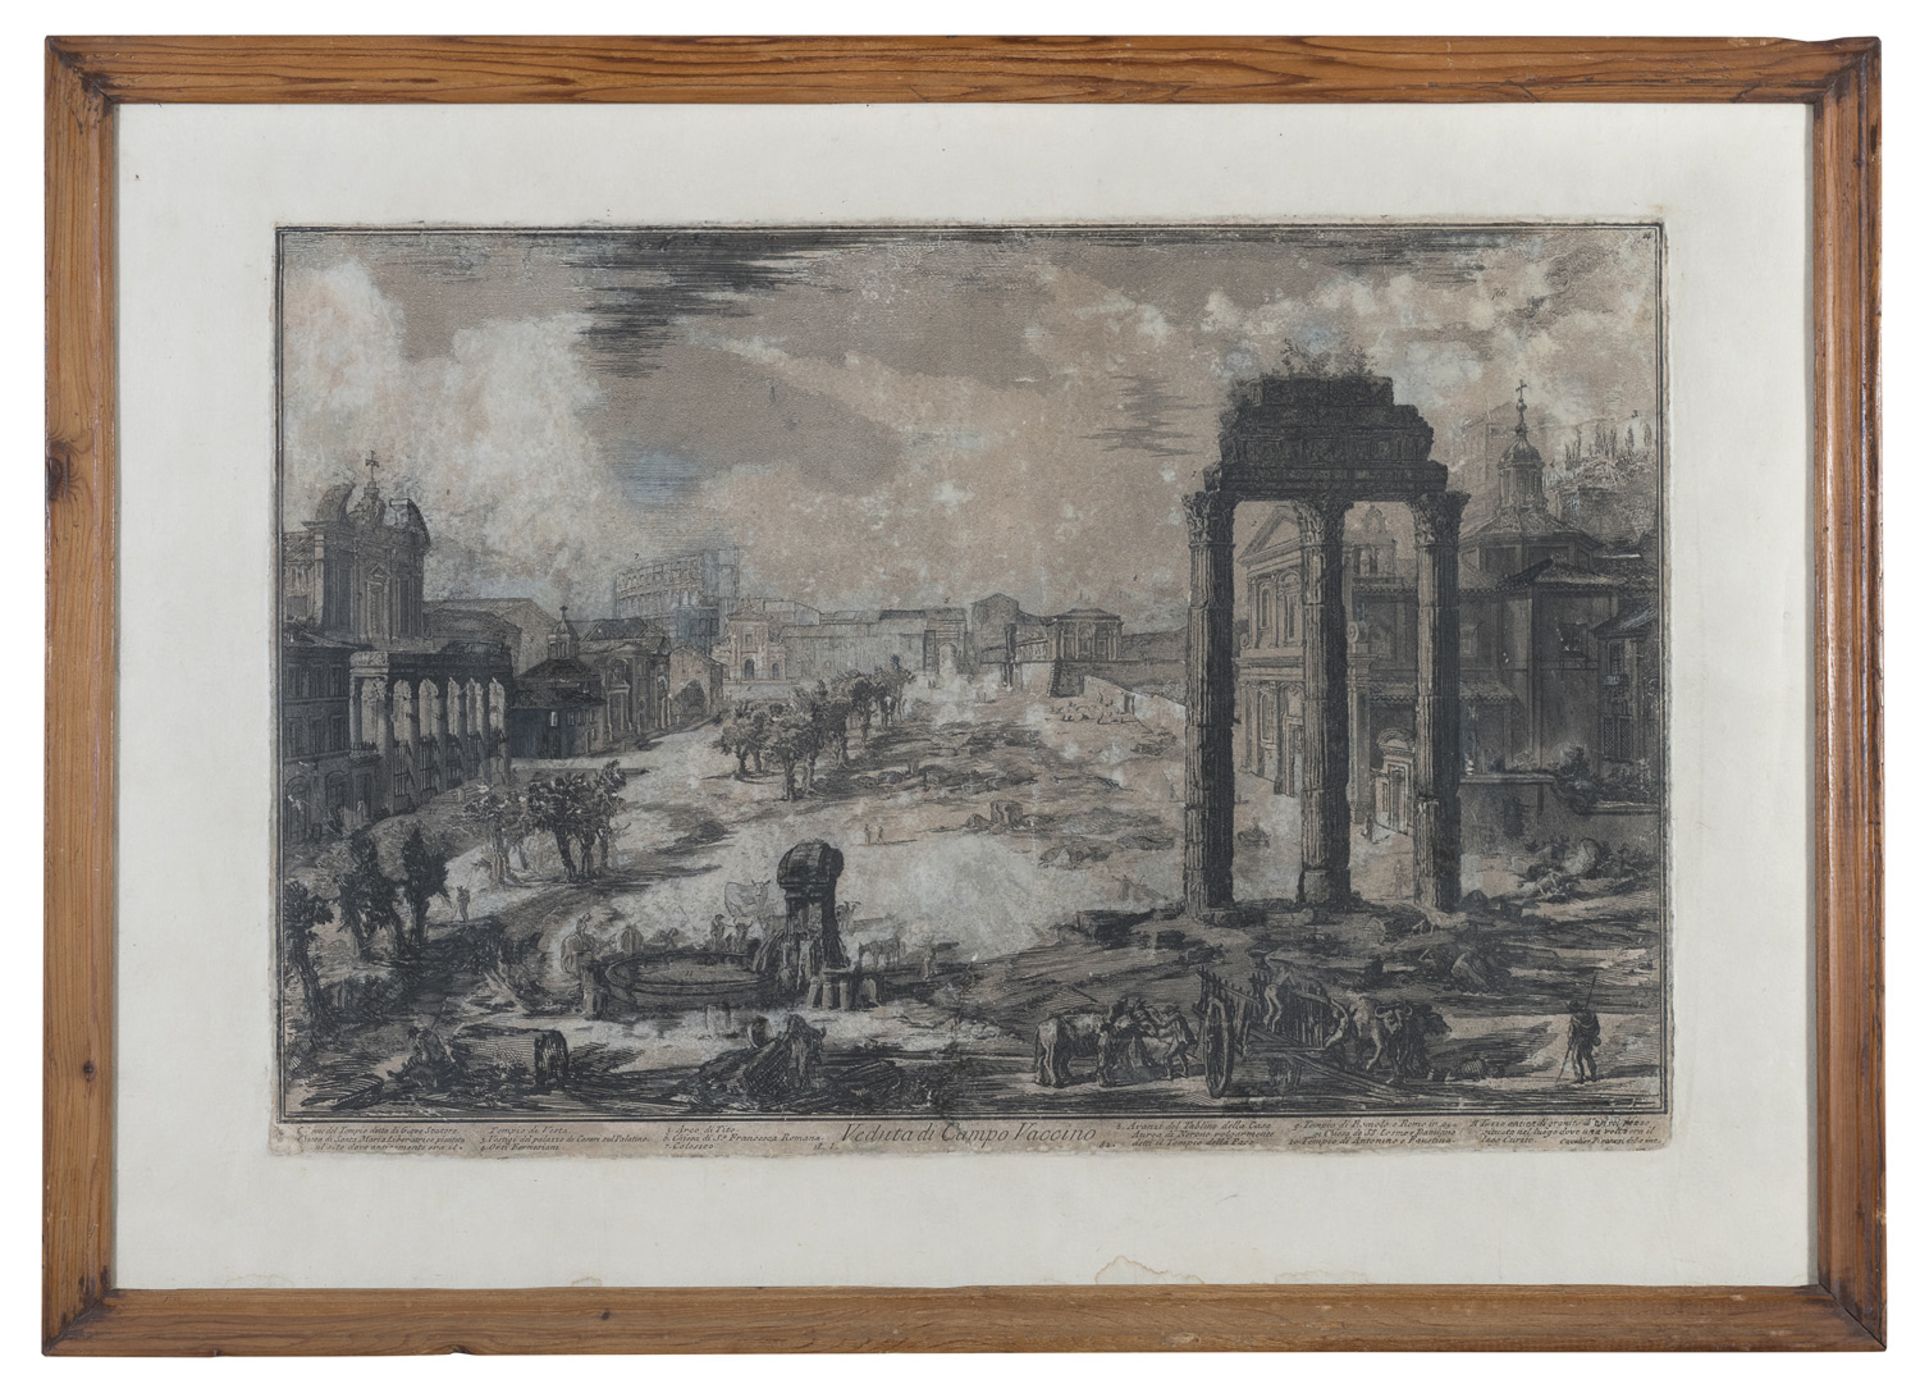 ETCHING WITH VIEW OF CAMPO VACCINO BY PIRANESI (1720-1778)